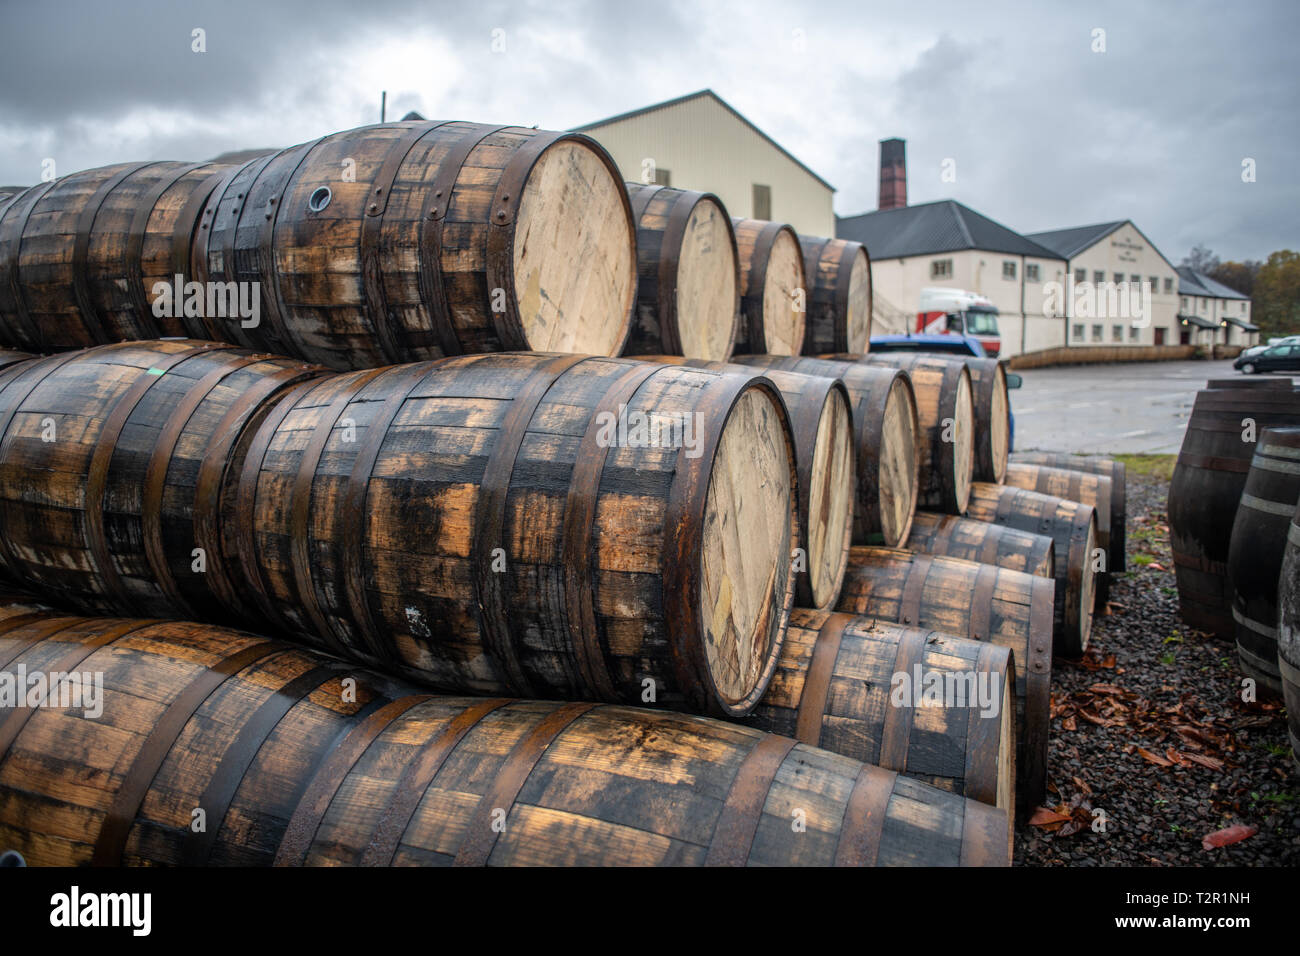 Barrels stacked at Ben Nevis Distillery for whisky aging process in Fort William, Scotland Stock Photo